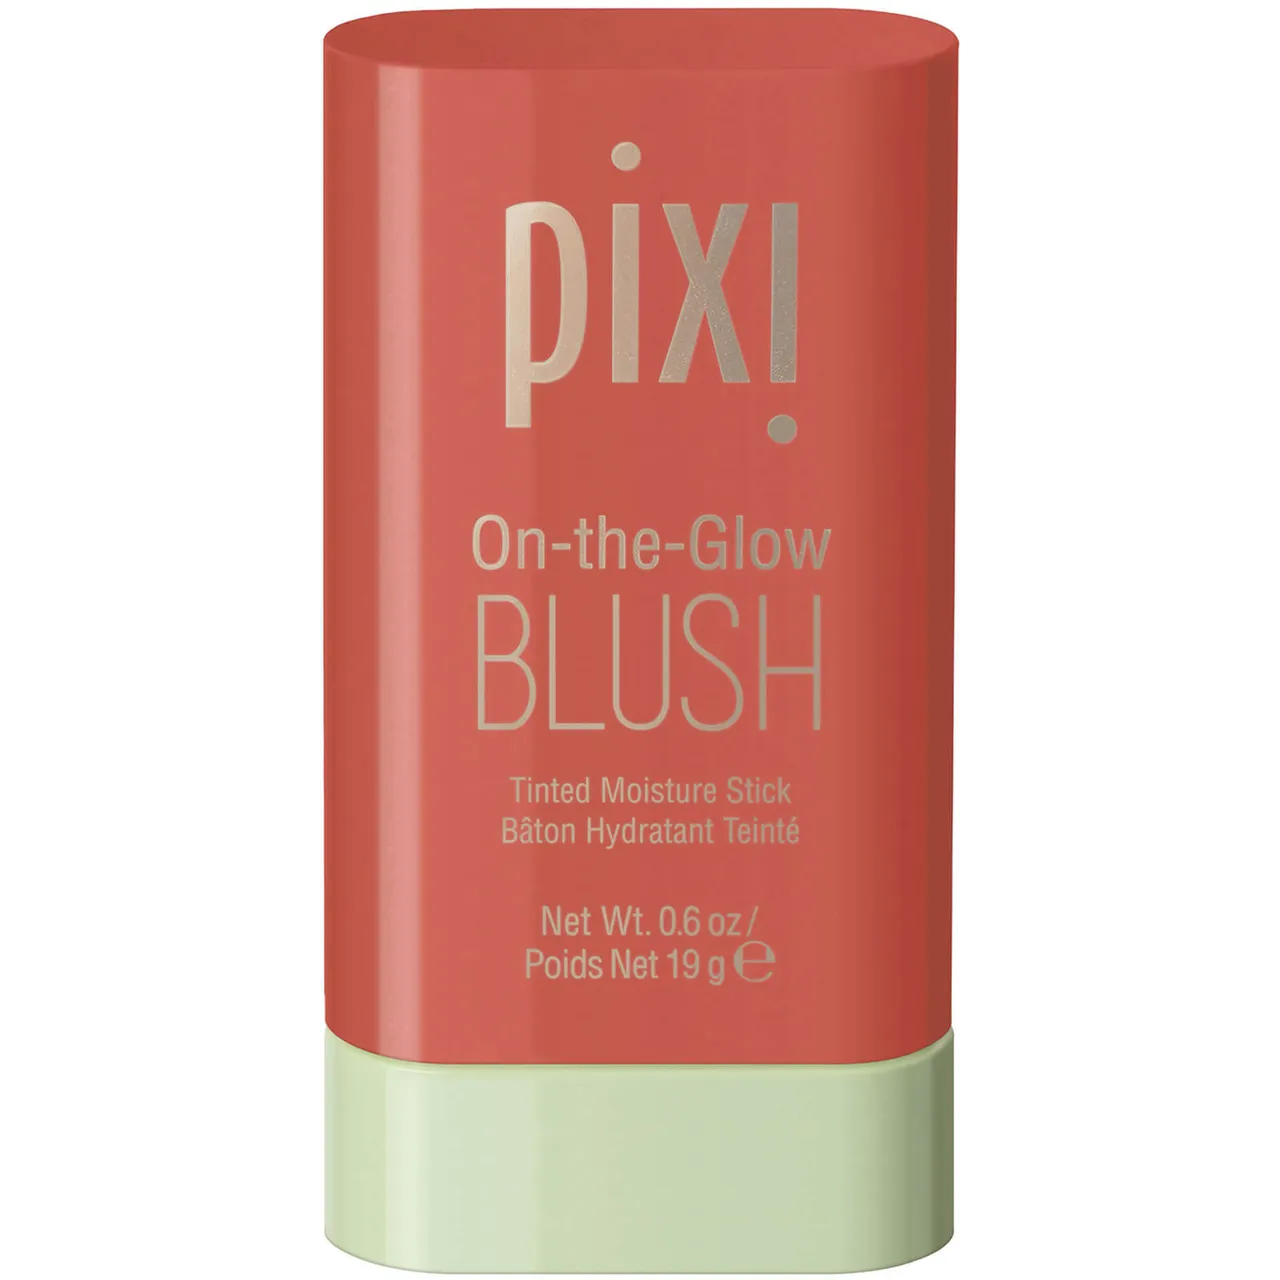 PIXI On-The-Glow Blush Stick 19g (Various Shades) - Juicy